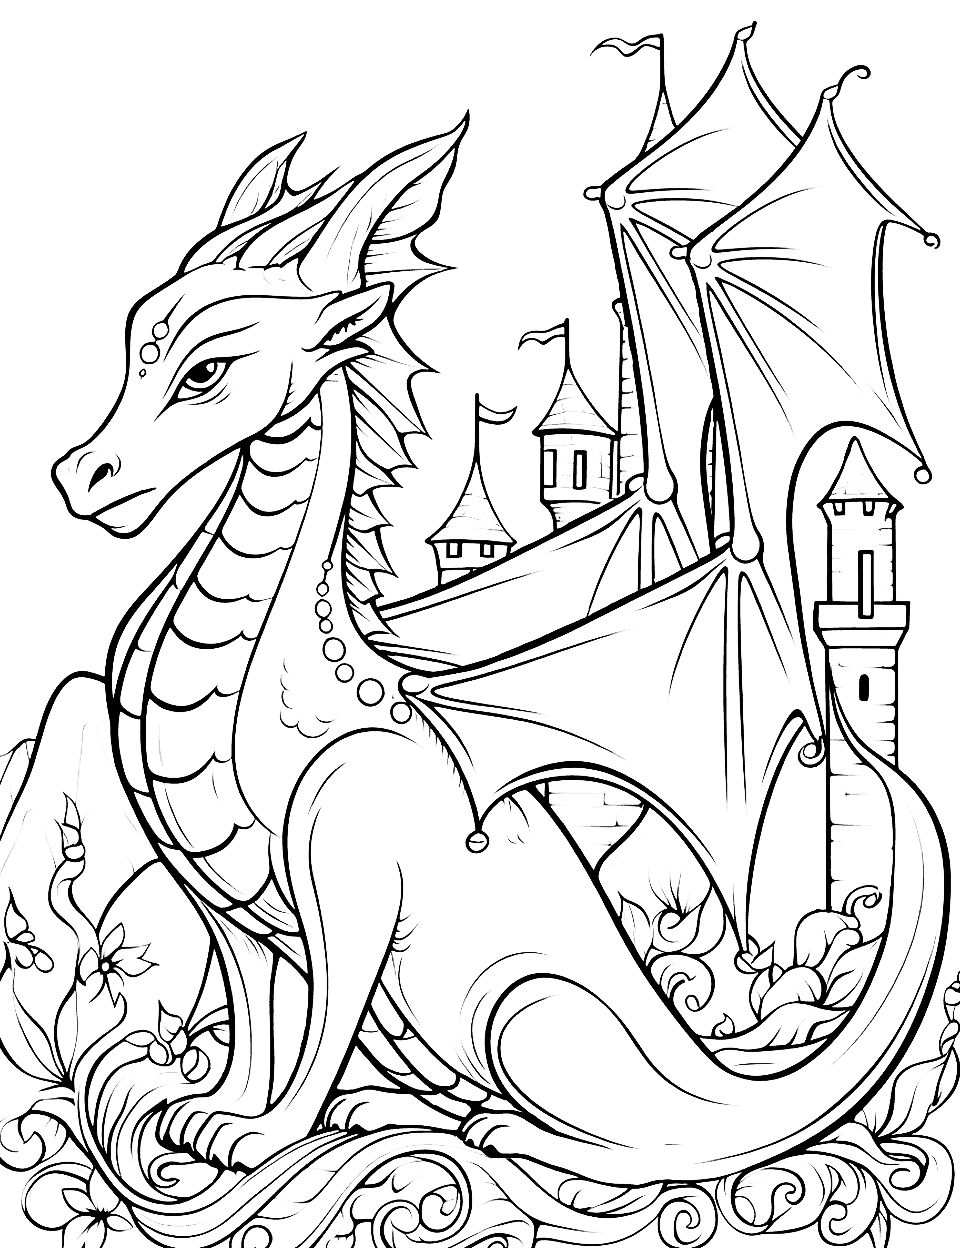 Dragon & Castle Adult Coloring Page - A magical page featuring a dragon sitting in front of a castle.